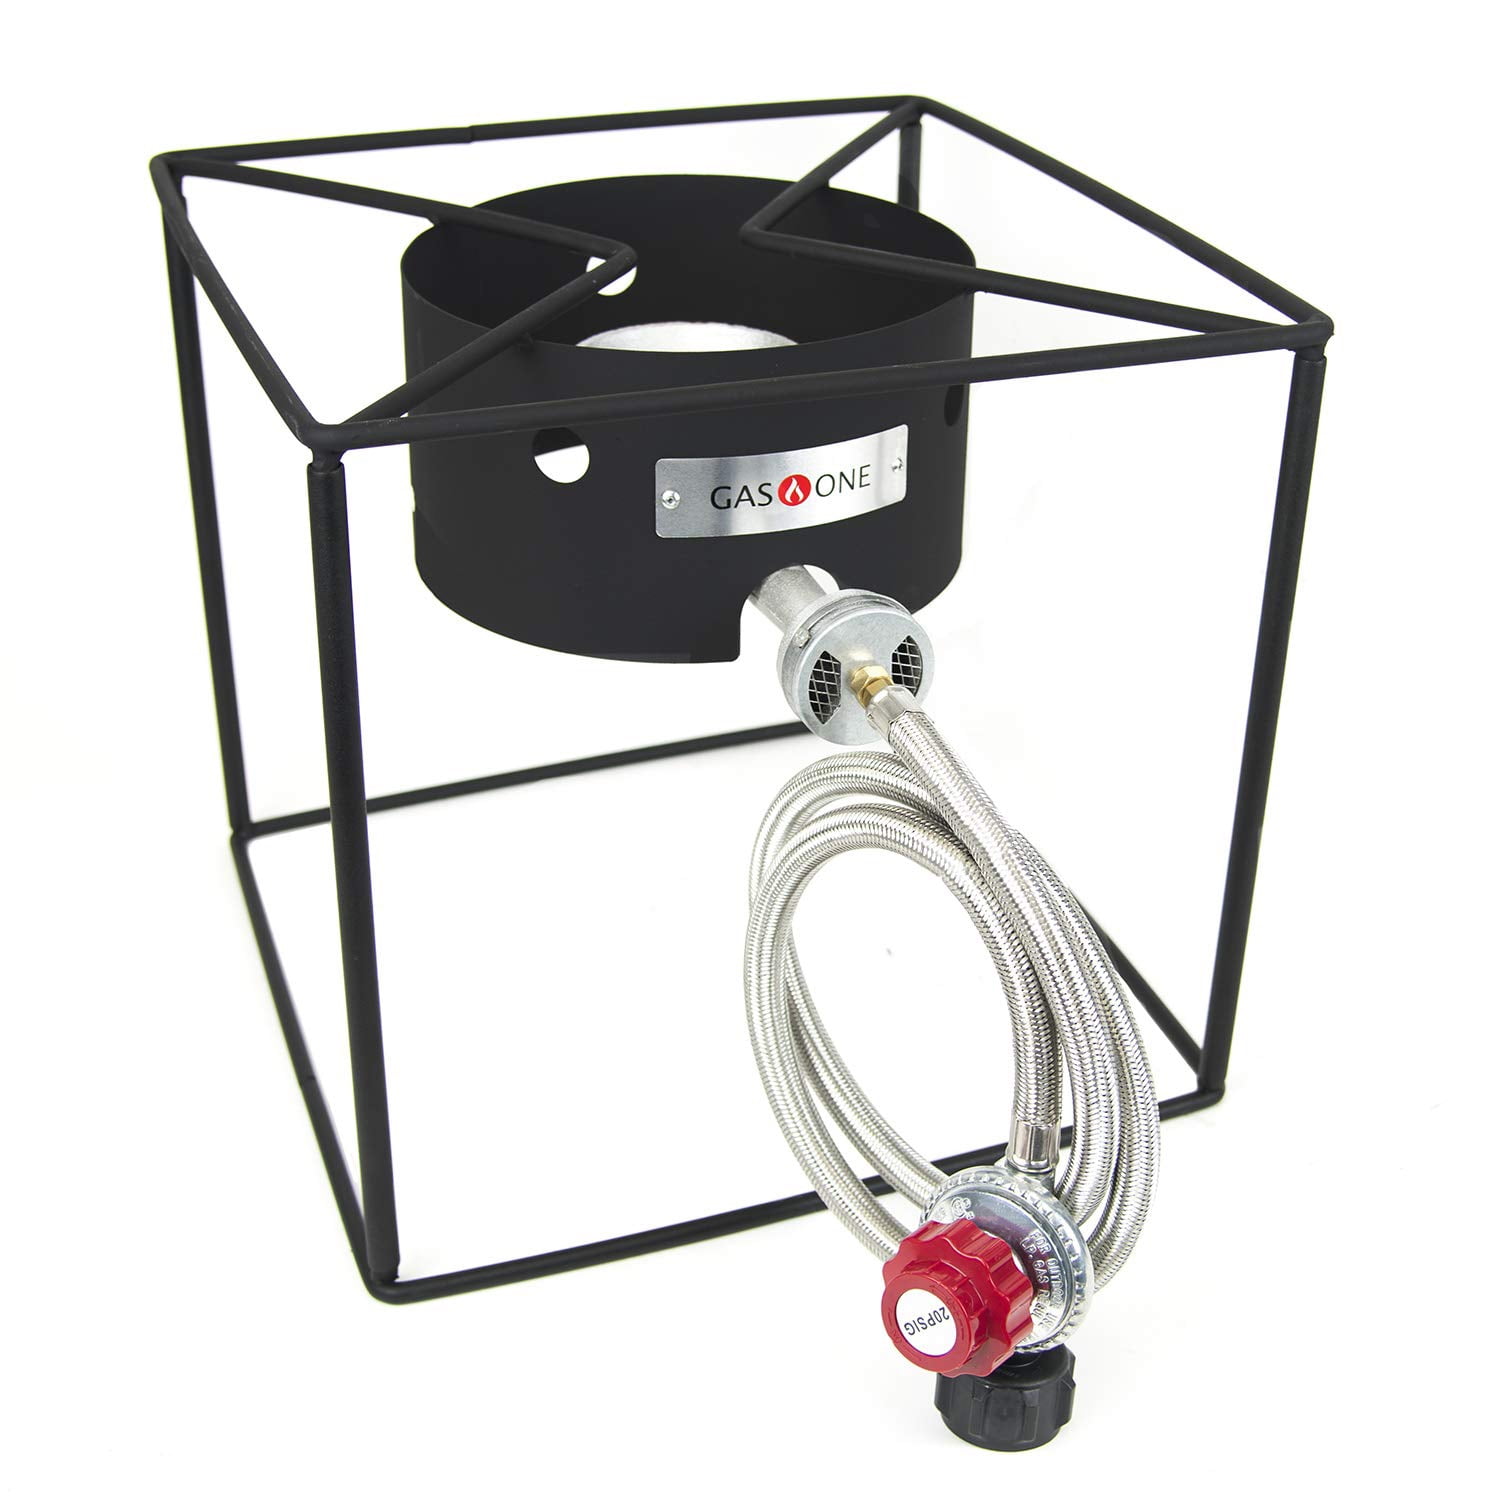 Gas One Portable Collapsible Propane Burner with Propane Hose 